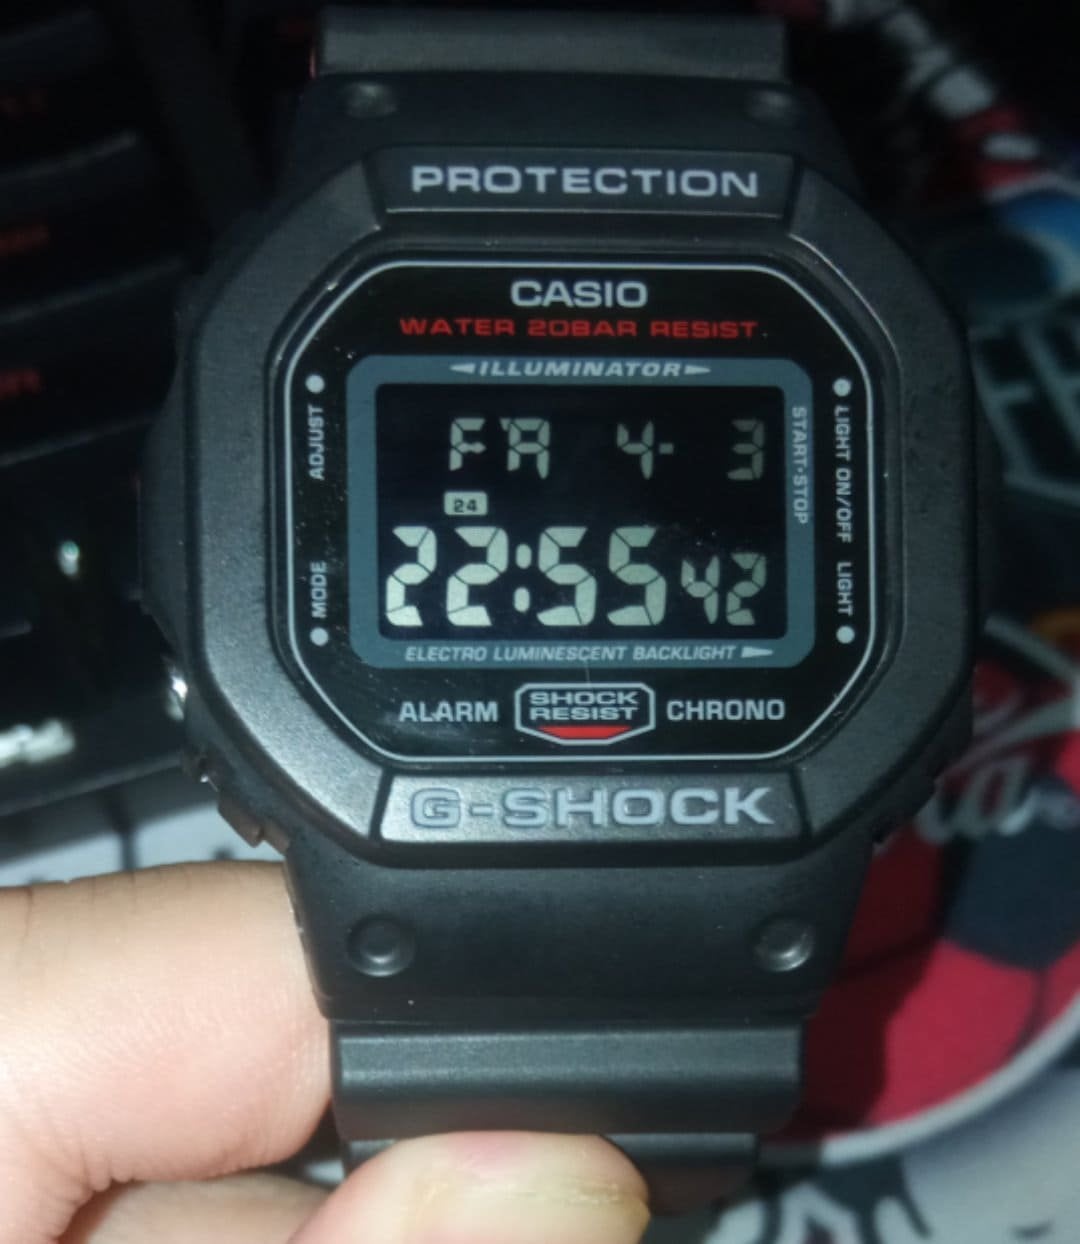 DW-5600 acess test Can\'t and | Forums on it\'s WatchUSeek not my Watch fake. screen